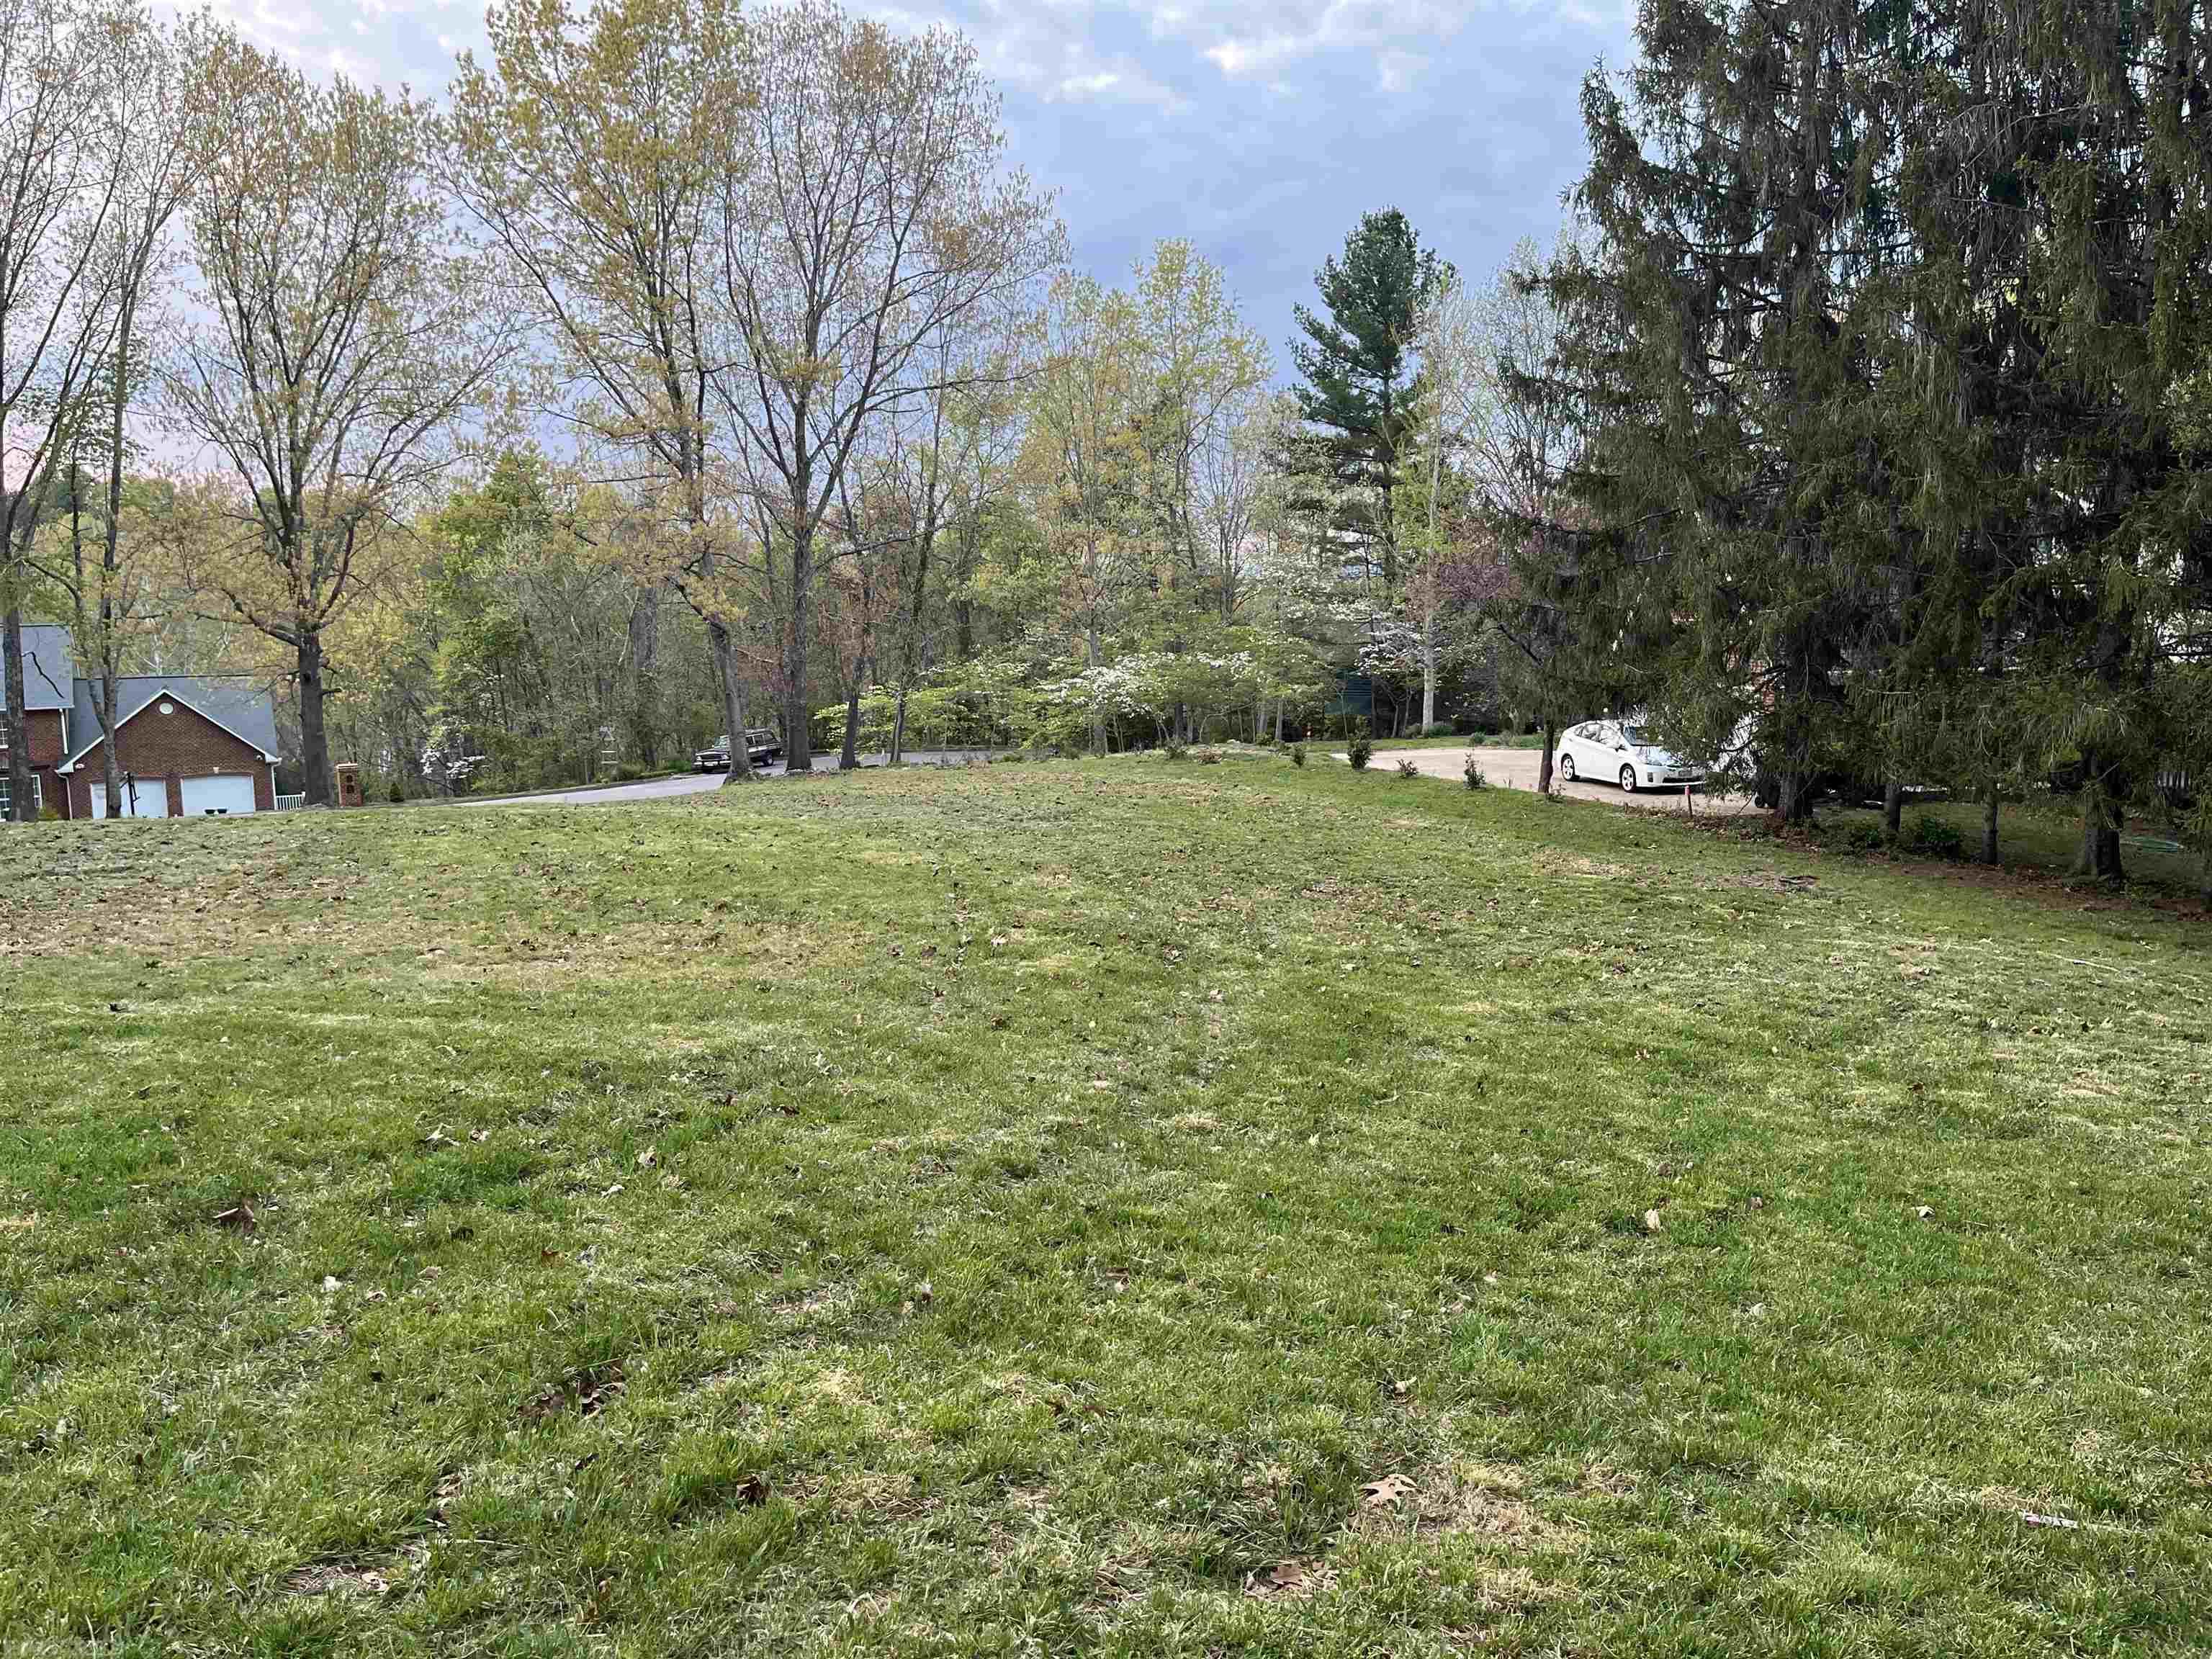 EXTREMELY FLAT BUILDABLE lot in coveted Radford neighborhood! This lot has already been surveyed and marked. Public utilities available. This one will not last!